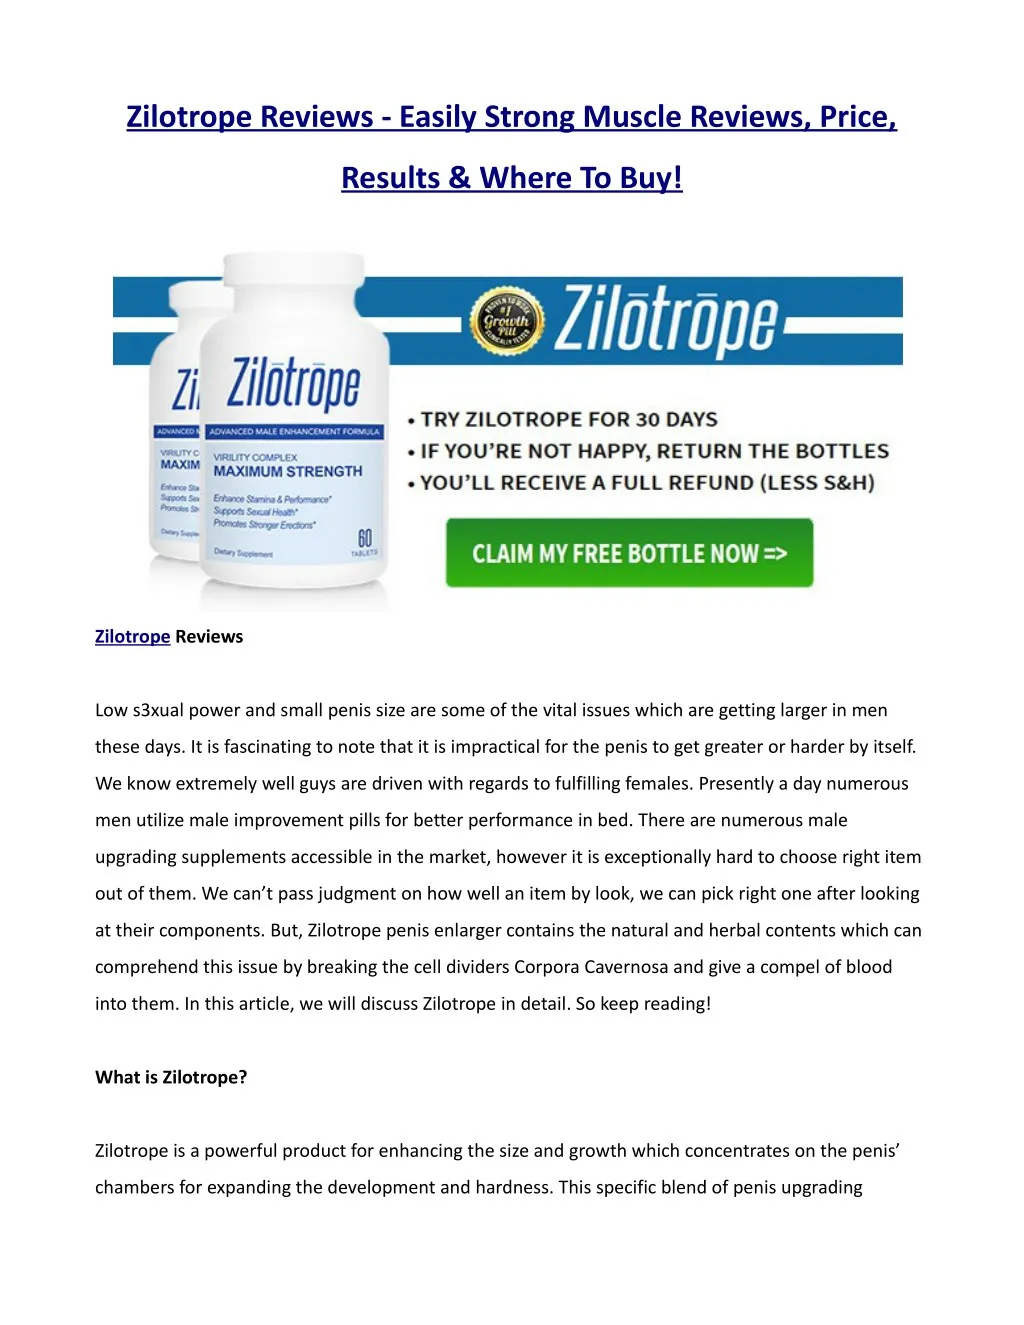 zilotrope reviews easily strong muscle reviews